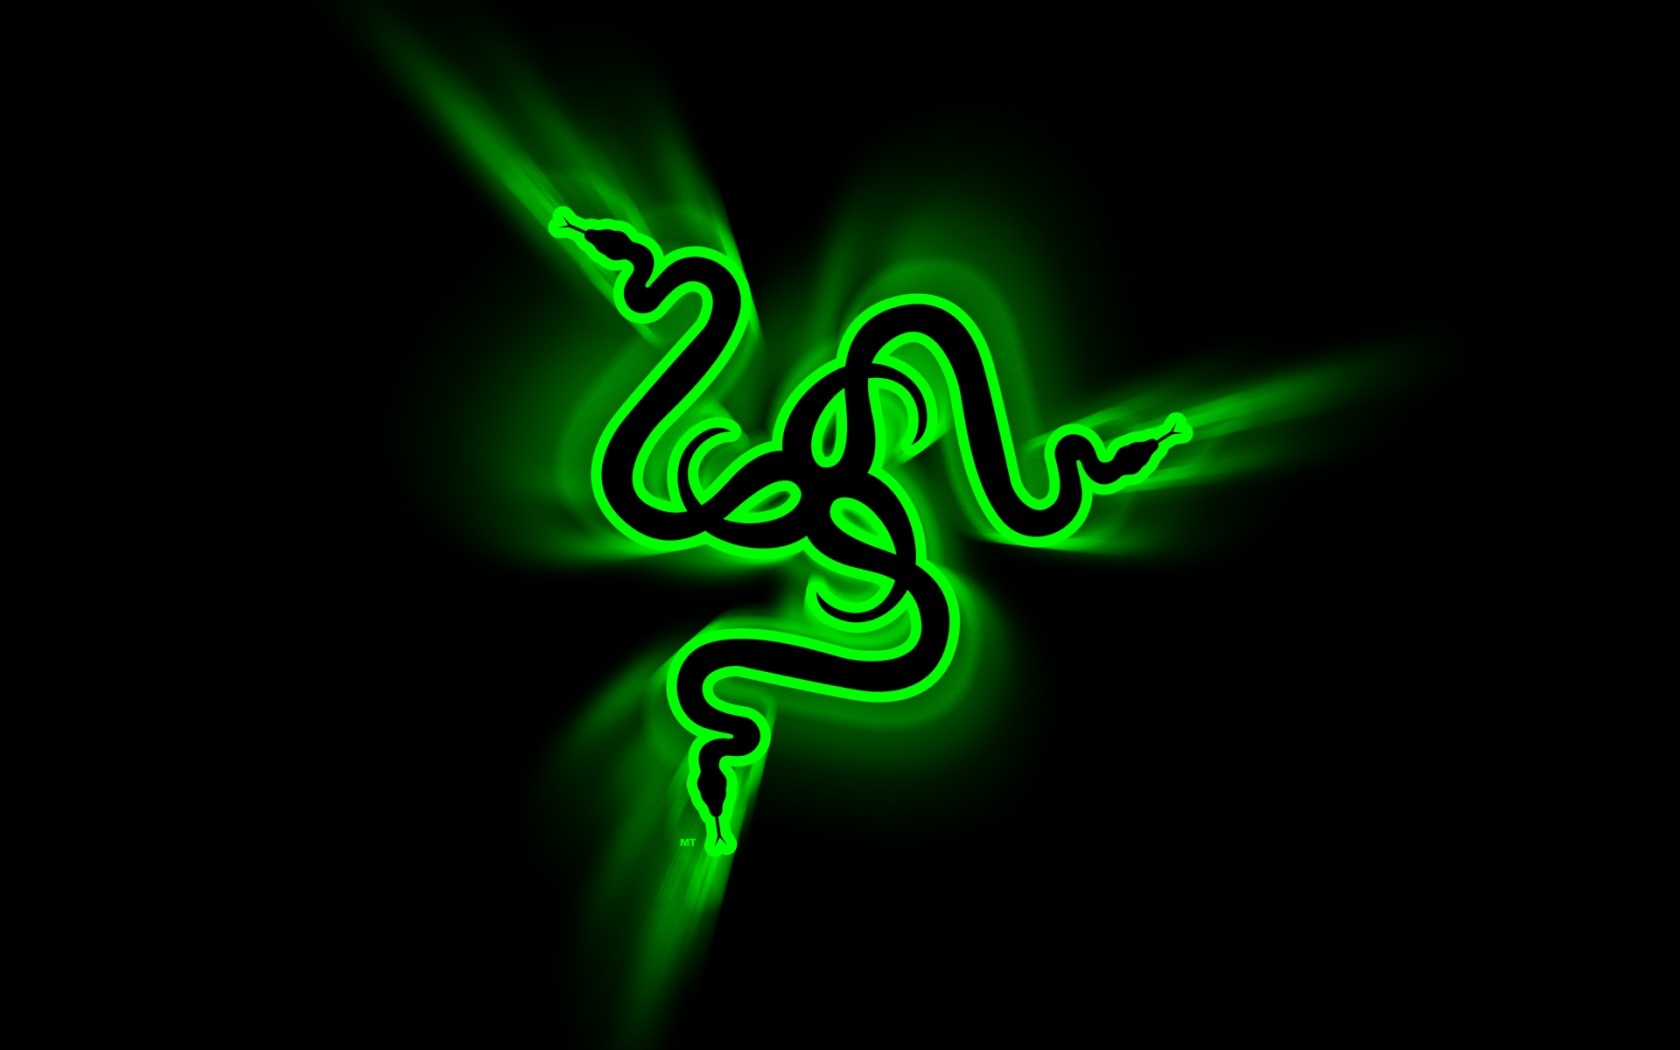 Razer iPhone Wallpaper Flipped Image And All